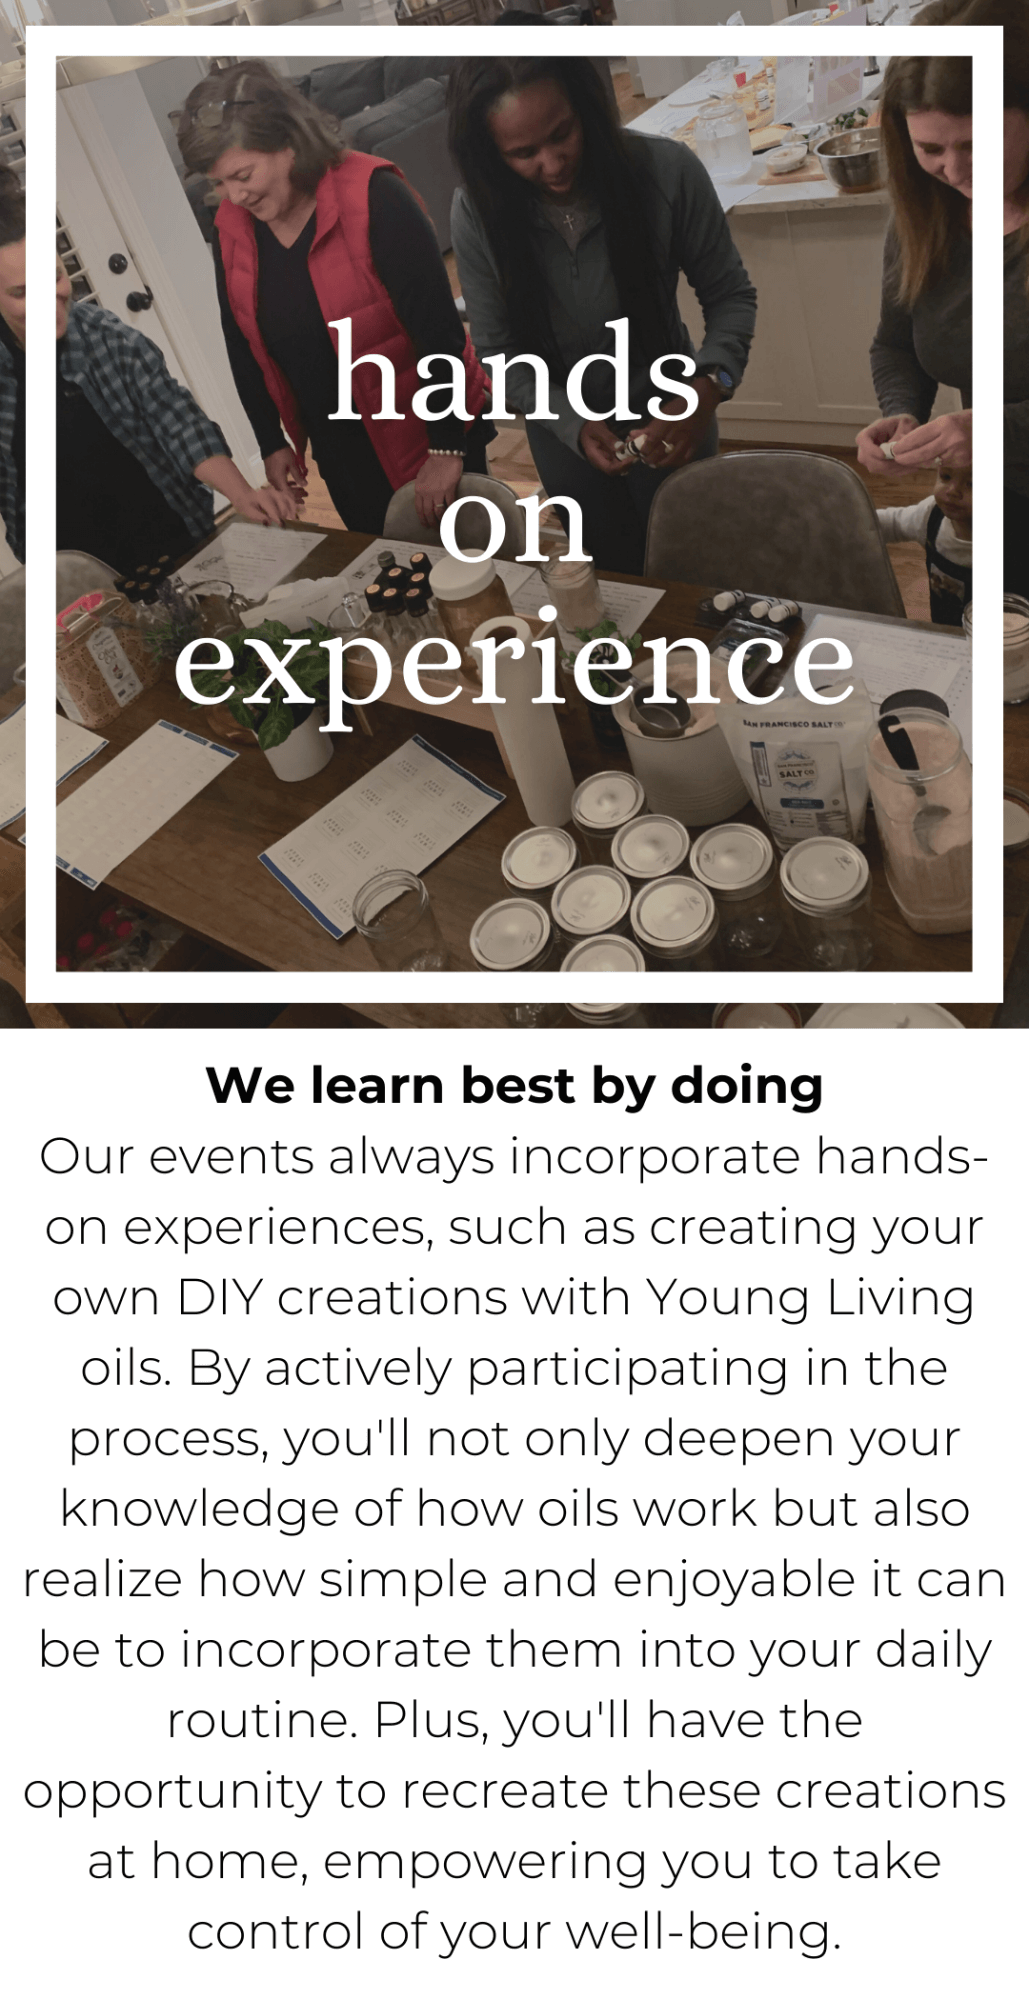 We learn best by doing  Our events always incorporate hands-on experiences, such as creating your own DIY creations with Young Living oils. By actively participating in the process, you'll not only deepen your knowledge of how oils work but also realize how simple and enjoyable it can be to incorporate them into your daily routine. Plus, you'll have the opportunity to recreate these creations at home, empowering you to take control of your well-being.